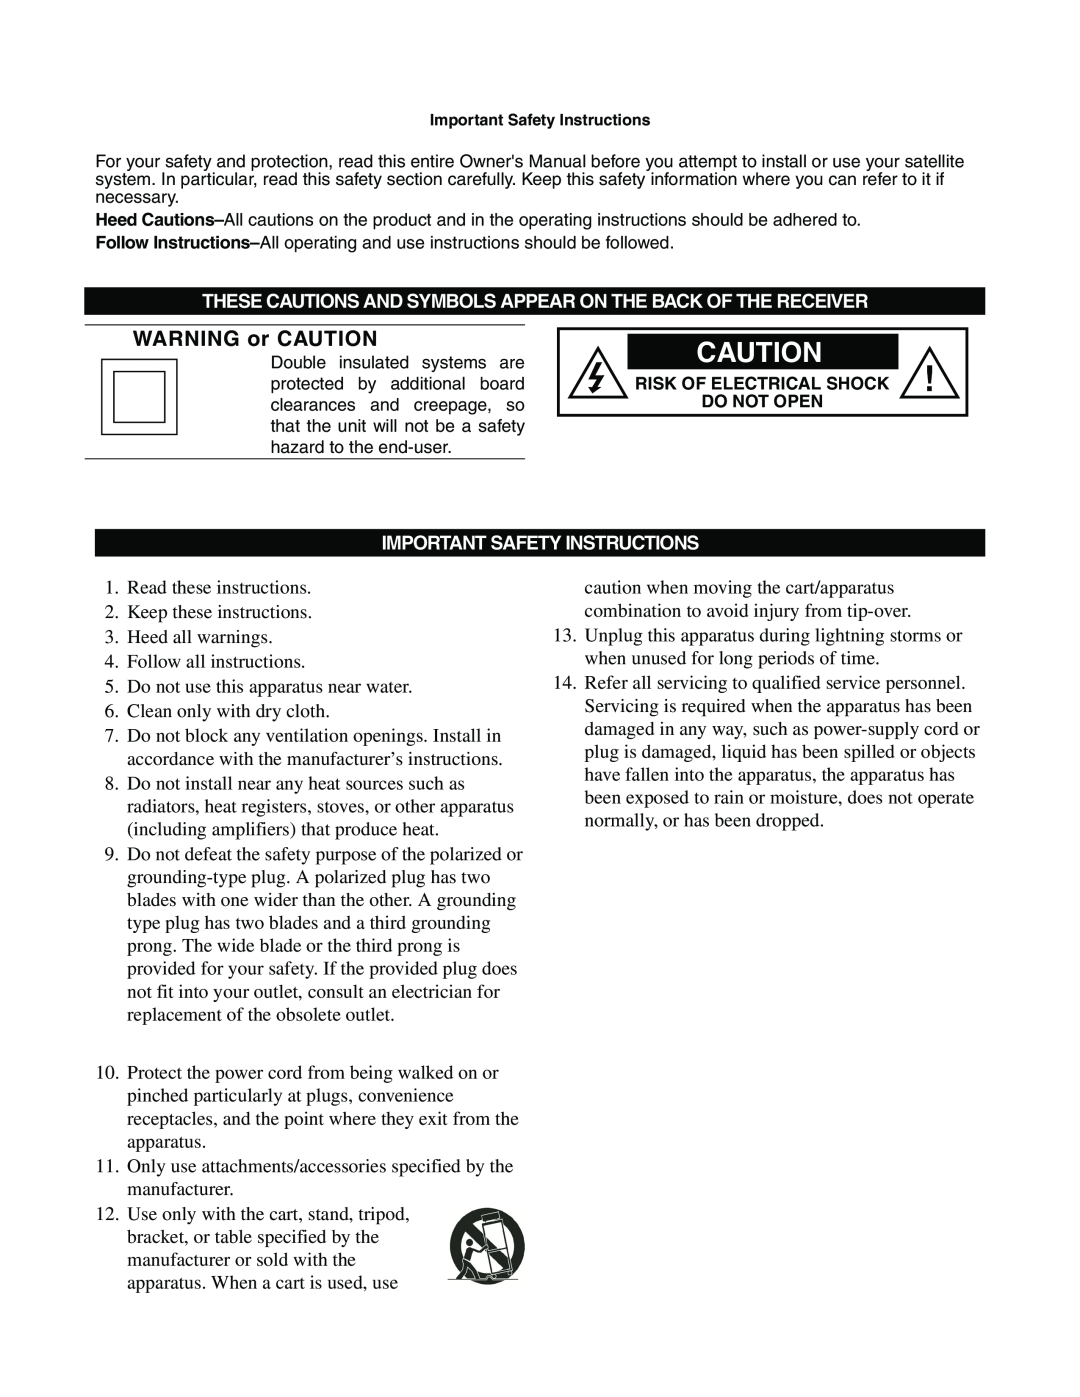 Sony SAT-A65, SAT-B65 manual WARNING or CAUTION, These Cautions And Symbols Appear On The Back Of The Receiver 